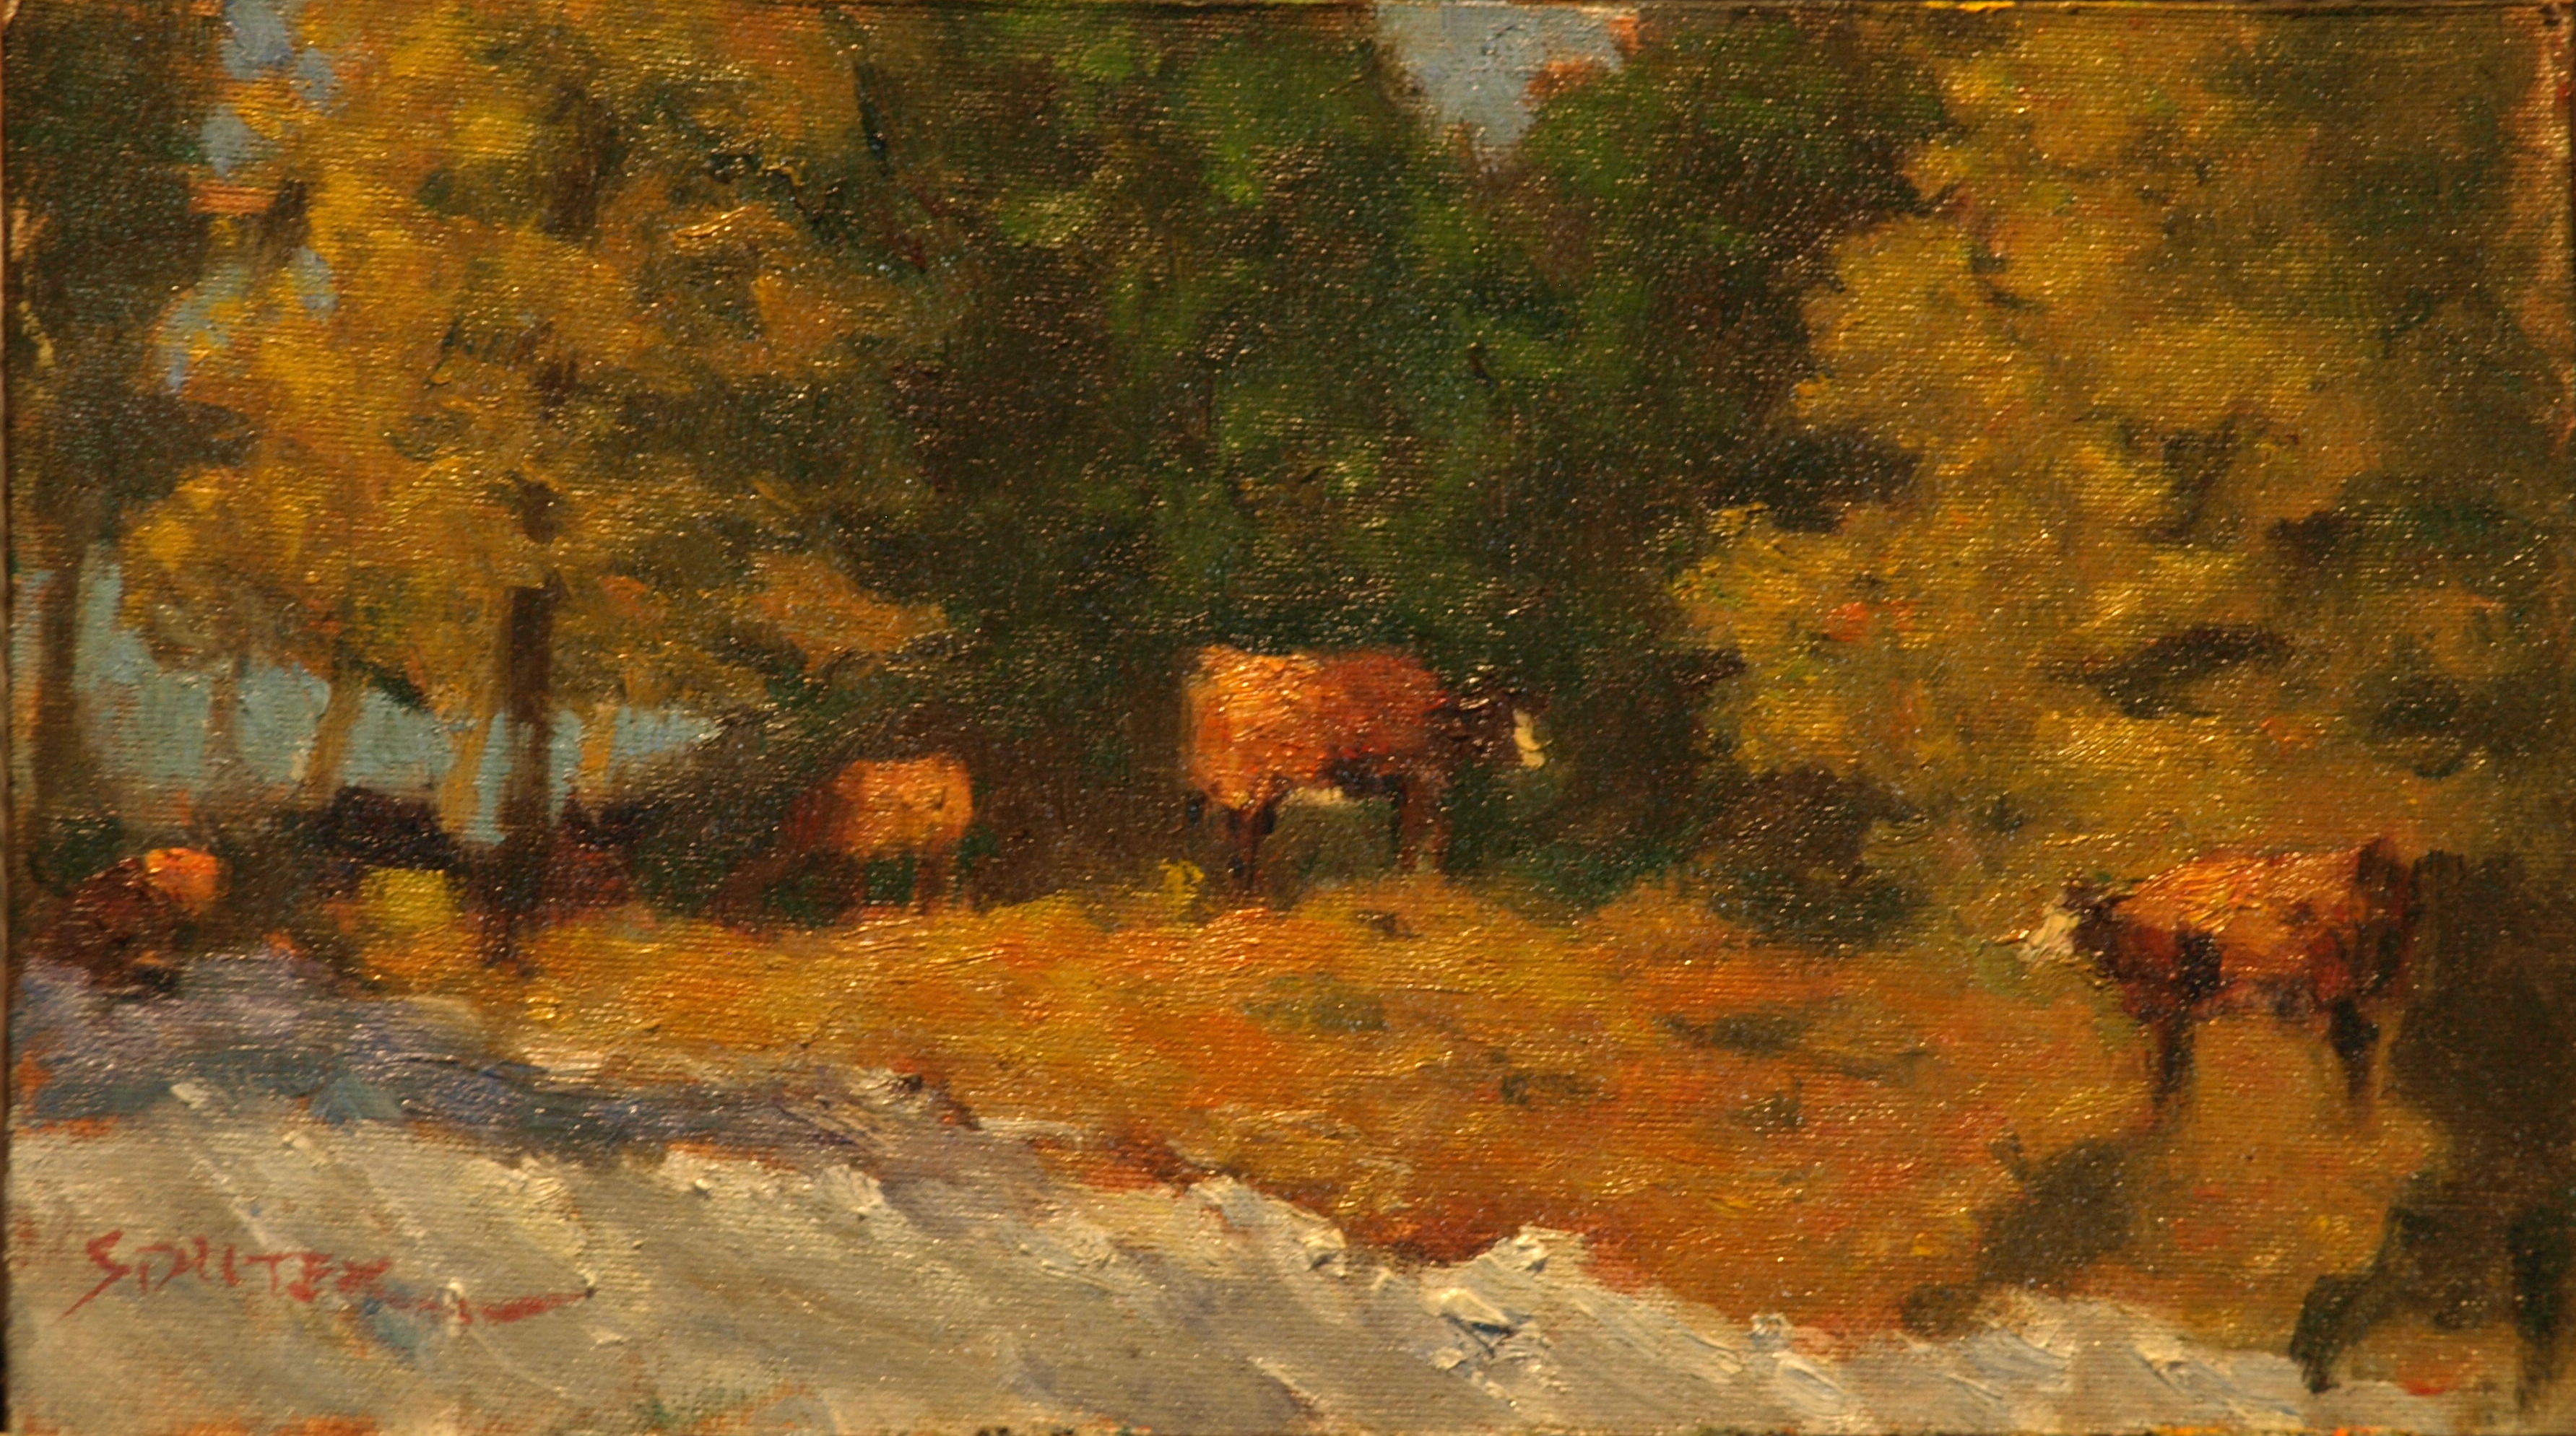 Cows Along the Ridge, Oil on Canvas on Panel, 8 x 14 Inches, by Richard Stalter, $225